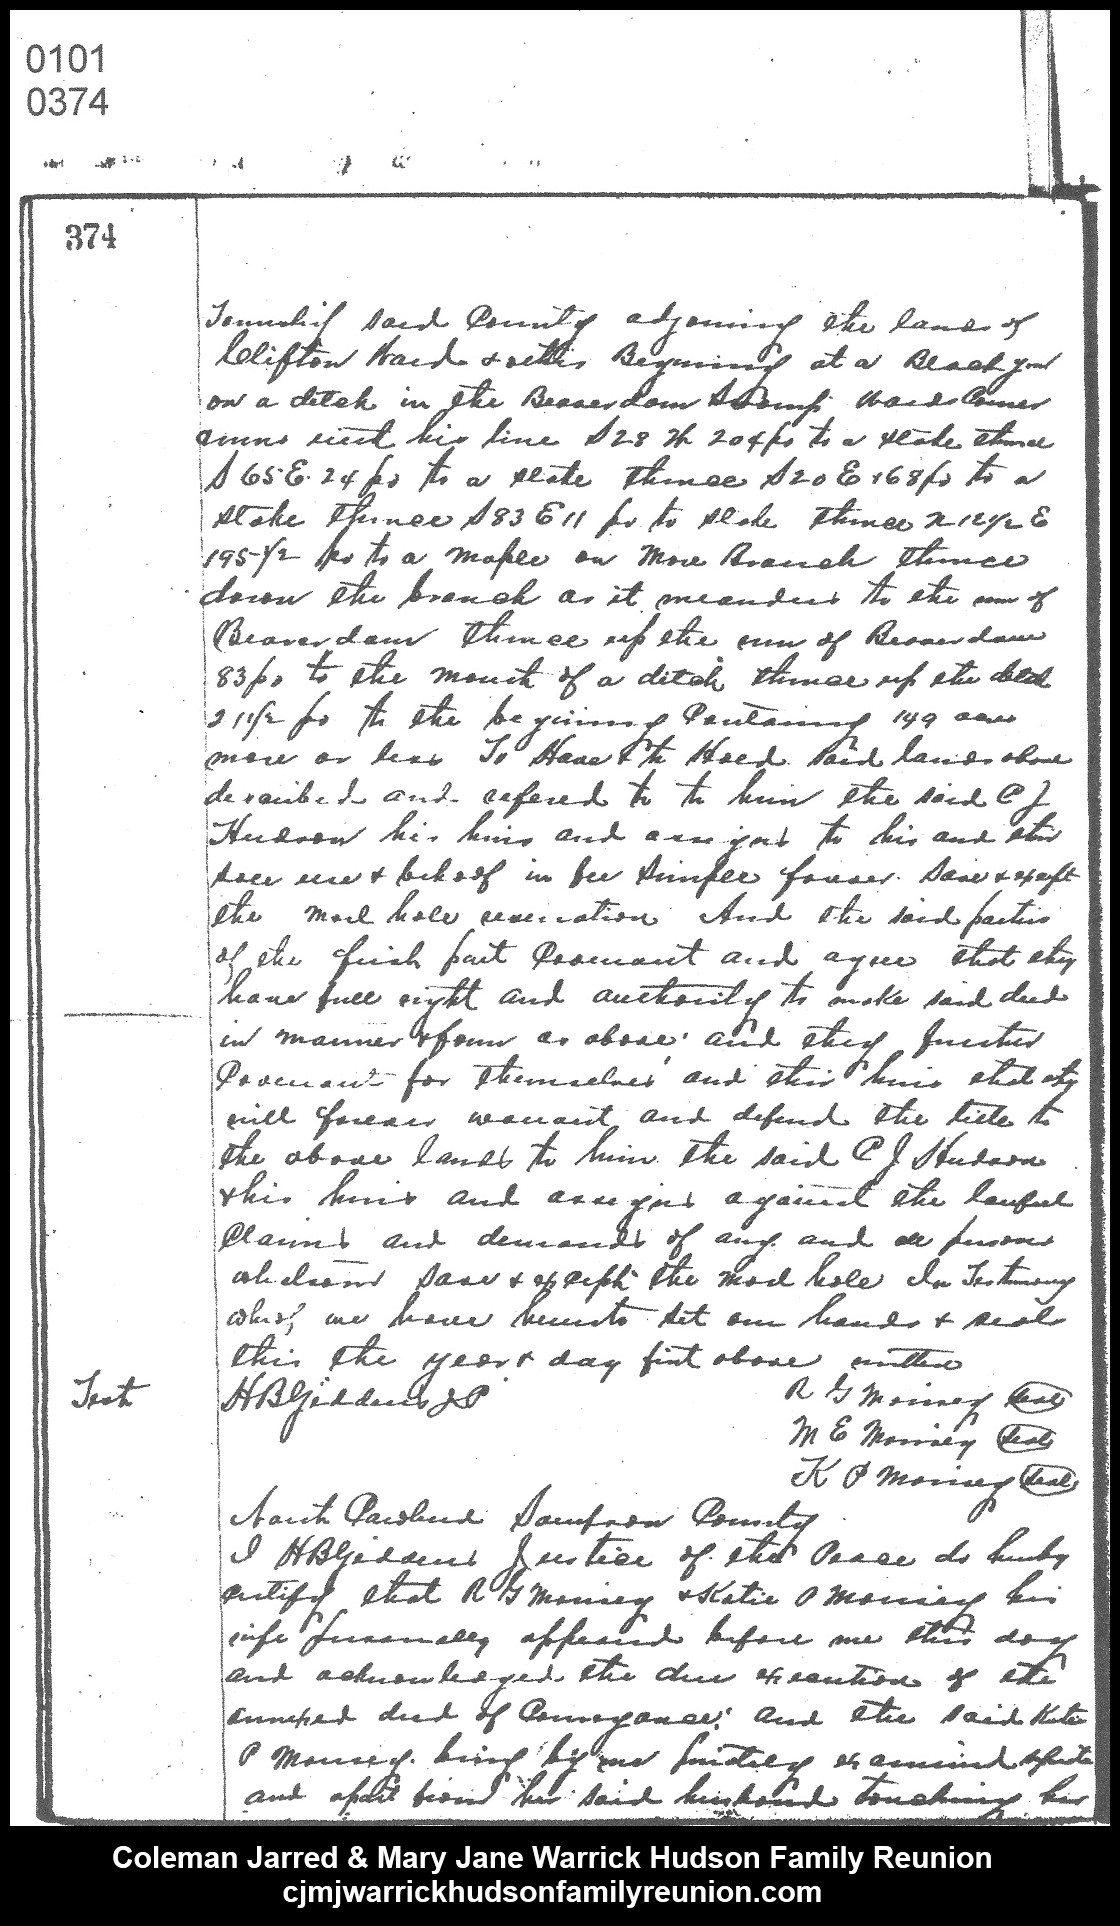 1899, 2-21 - Deed - R. G. Morisey to C. J. (Page 2 of 3)